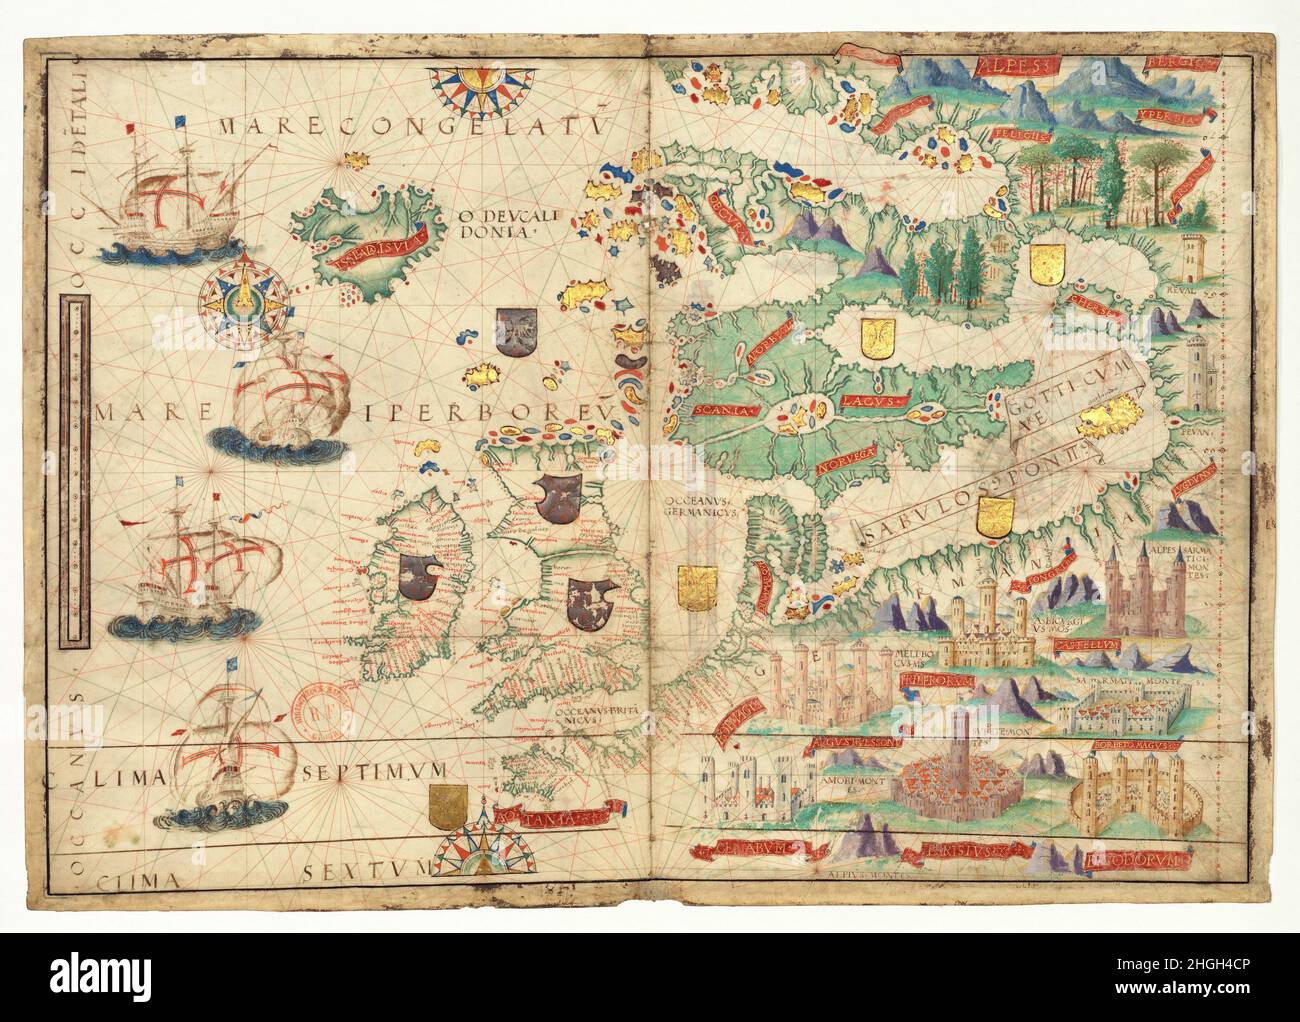 A Nautical Atlas of the Northeastern Atlantic Ocean and Northern Europe from the Miller Atlas in the collections of the National Library of France. Produced for King Manuel I of Portugal in 1519 by cartographers Pedro Reinel, his son Jorge Reinel, and Lopo Homem and miniaturist António de Holanda, the atlas contains eight maps on six loose sheets, painted on both sides. Stock Photo